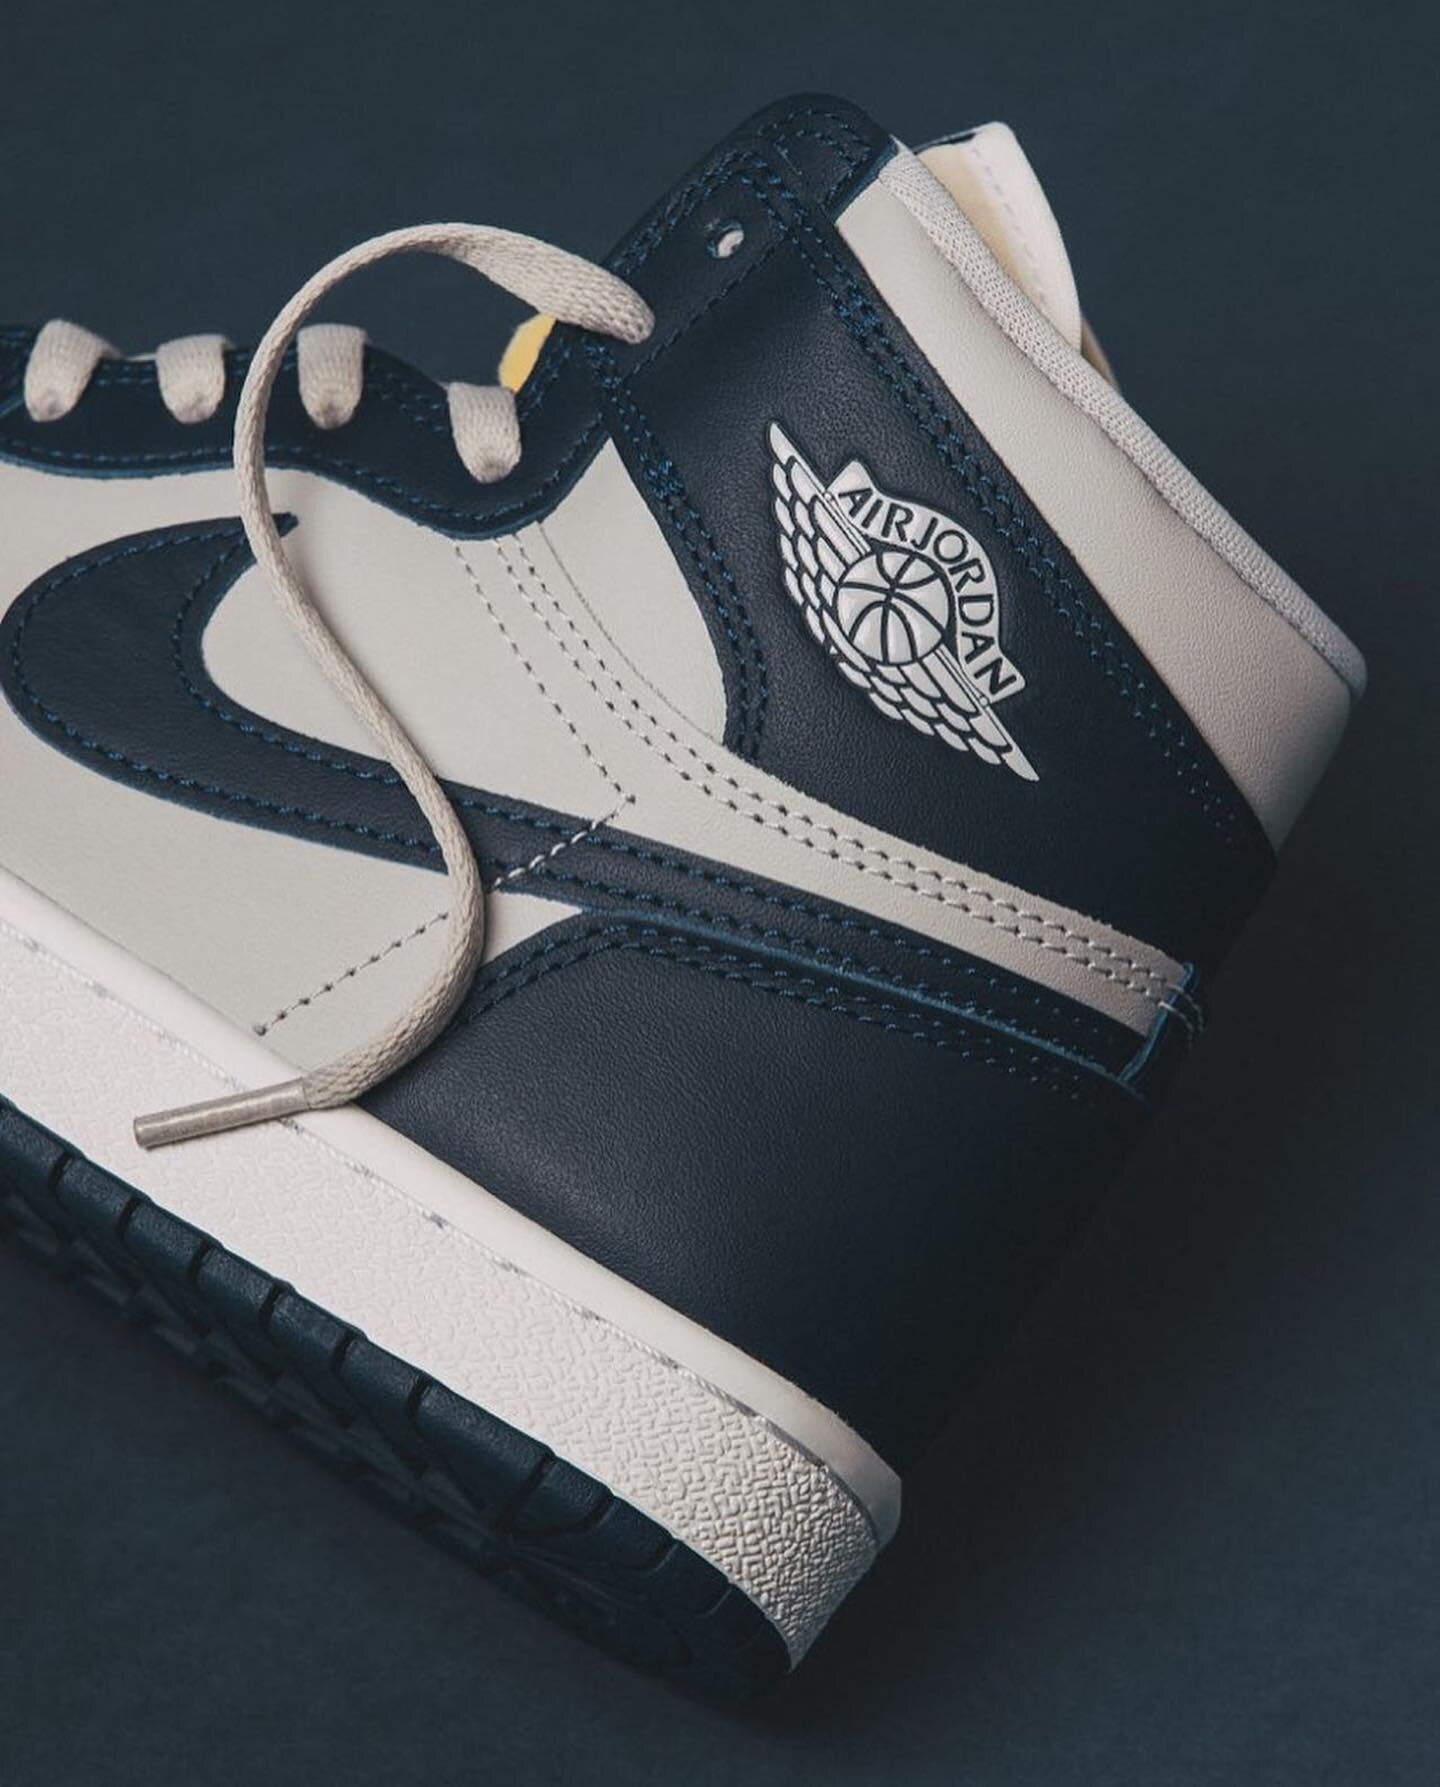 It&rsquo;s release day for the Jordan 1 High &lsquo;85 &ldquo;College Navy&rdquo; aka Georgetown. Raffles have come but there&rsquo;s still one shot left to shoot on the Nike SNKRS app @ 10am. Sure to make a top 10 list by the end of the year, these 